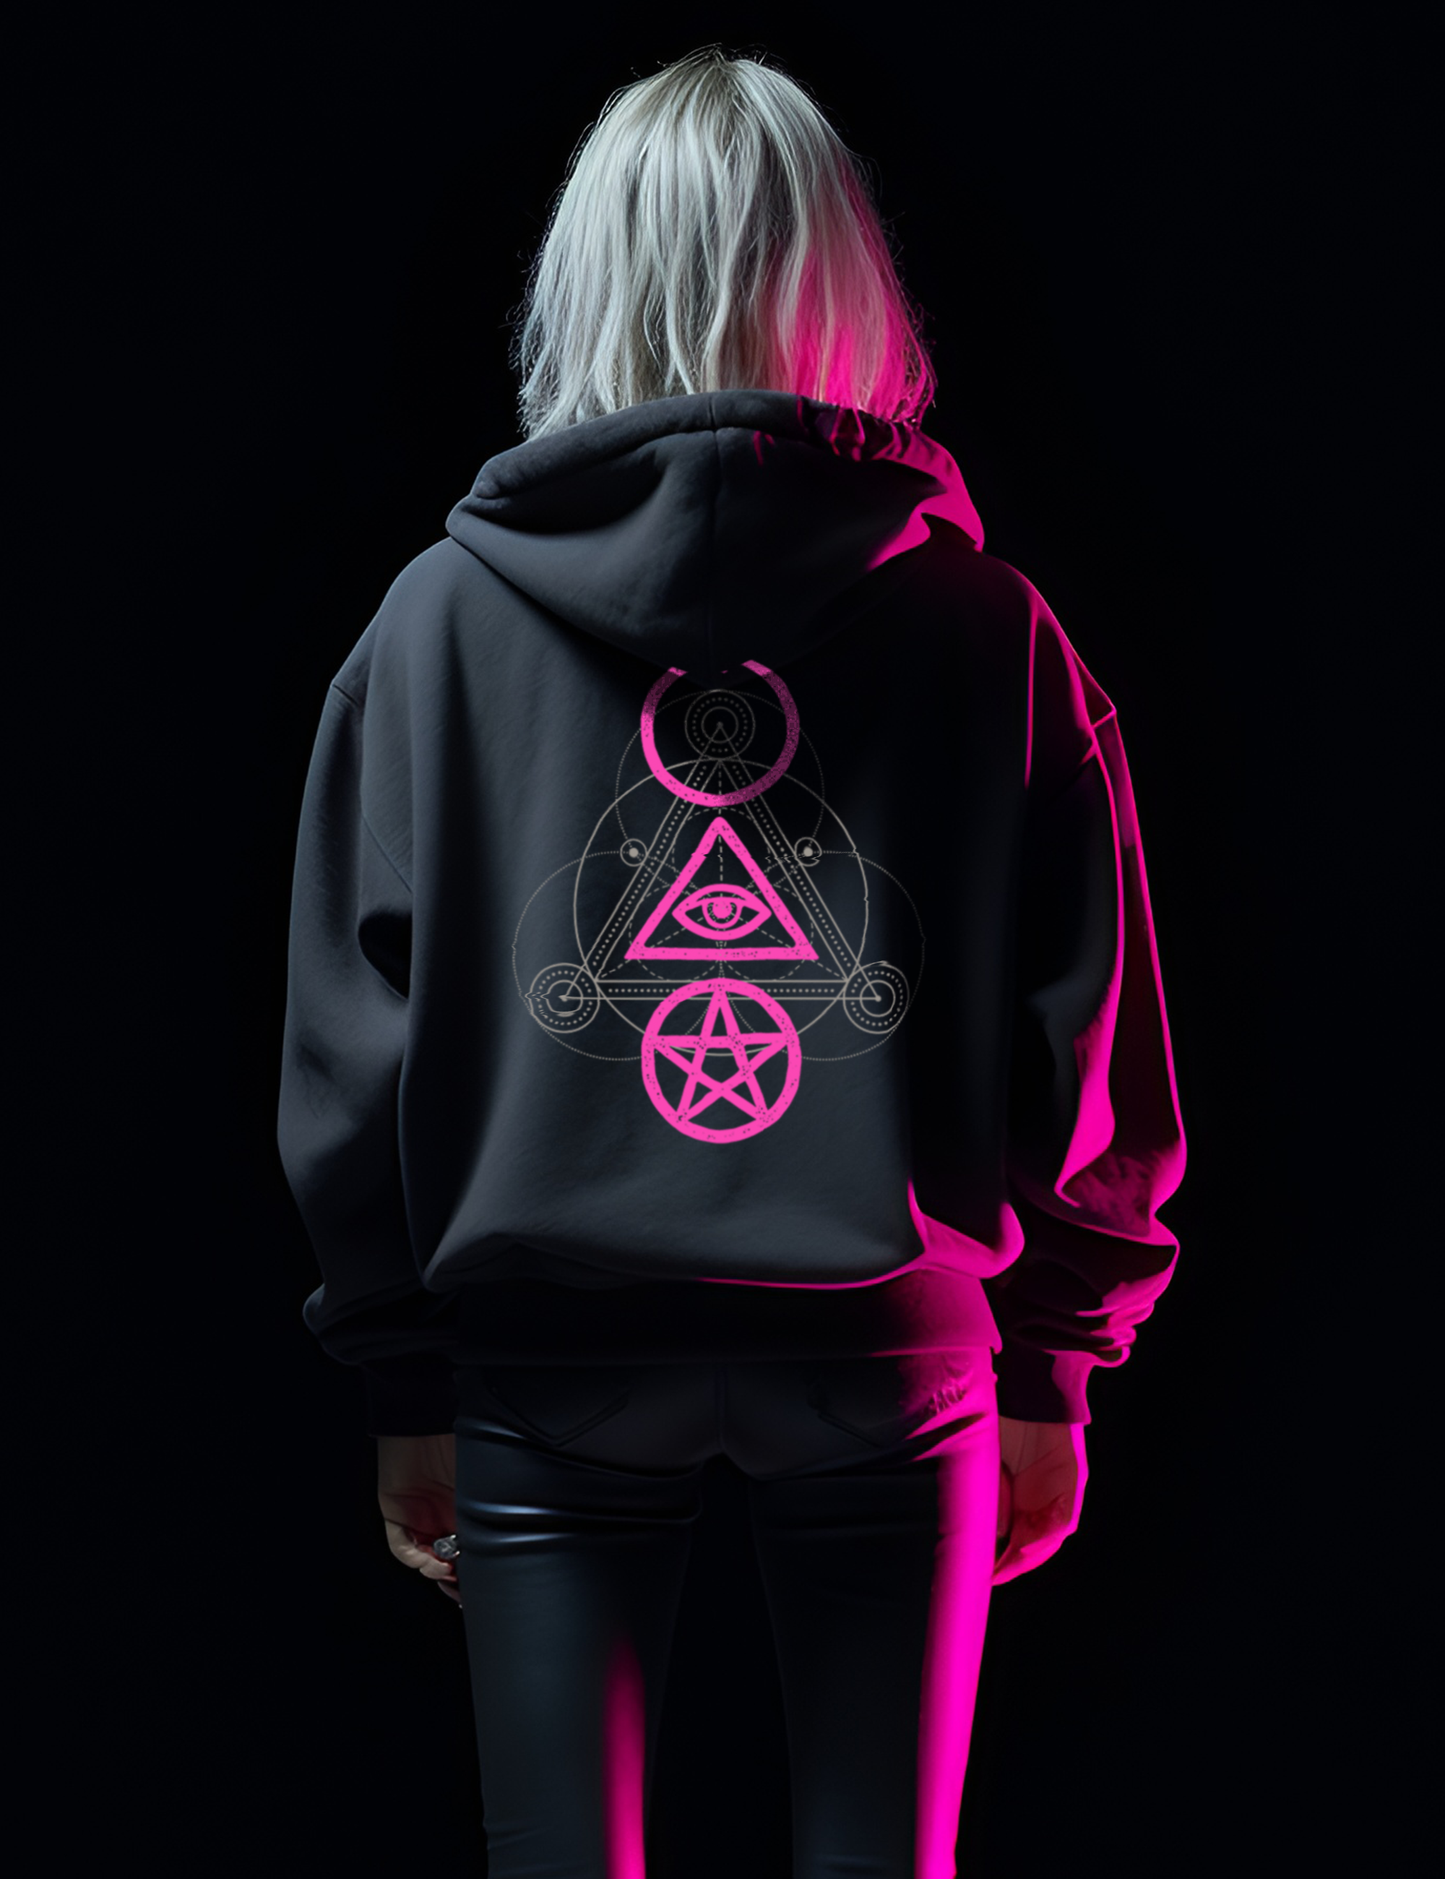 Occult Symbols Ouroboros Evil Eye Witchy Plus Size Goth Alt Clothing Hoodie